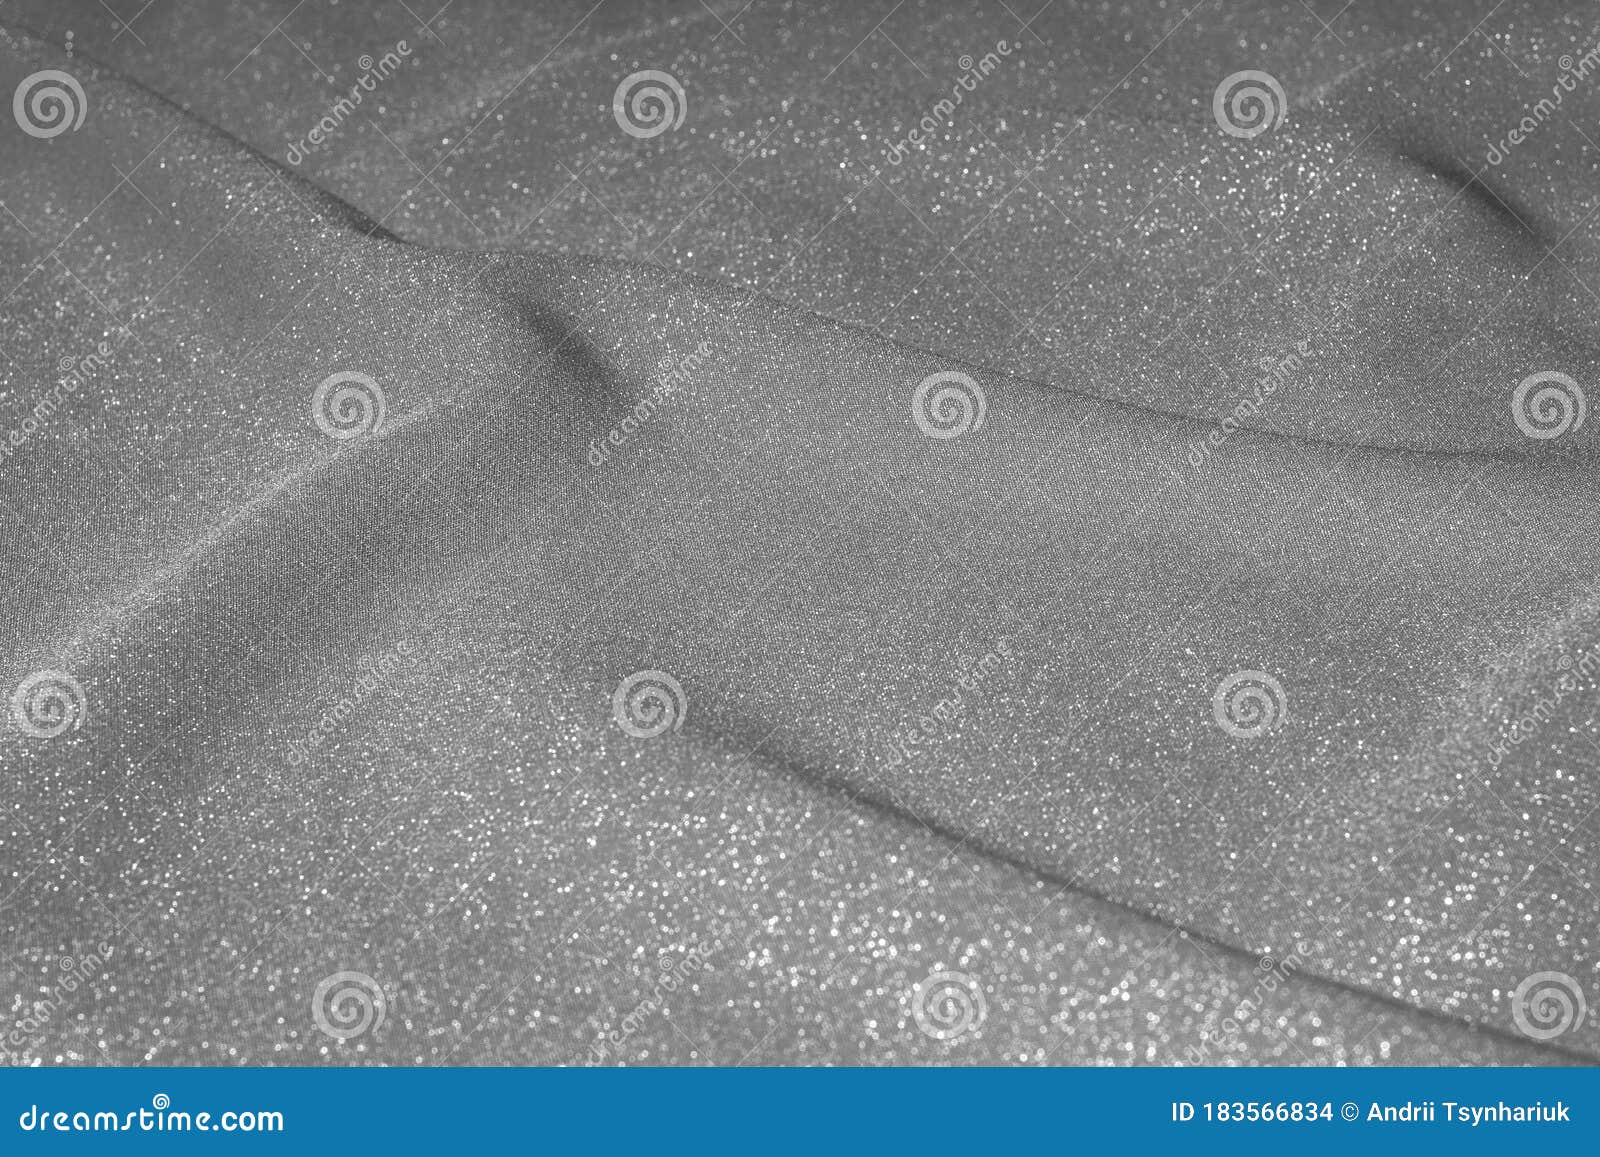 Download Black And White Wavy Silk Fabric With Folds. Mockup And ...